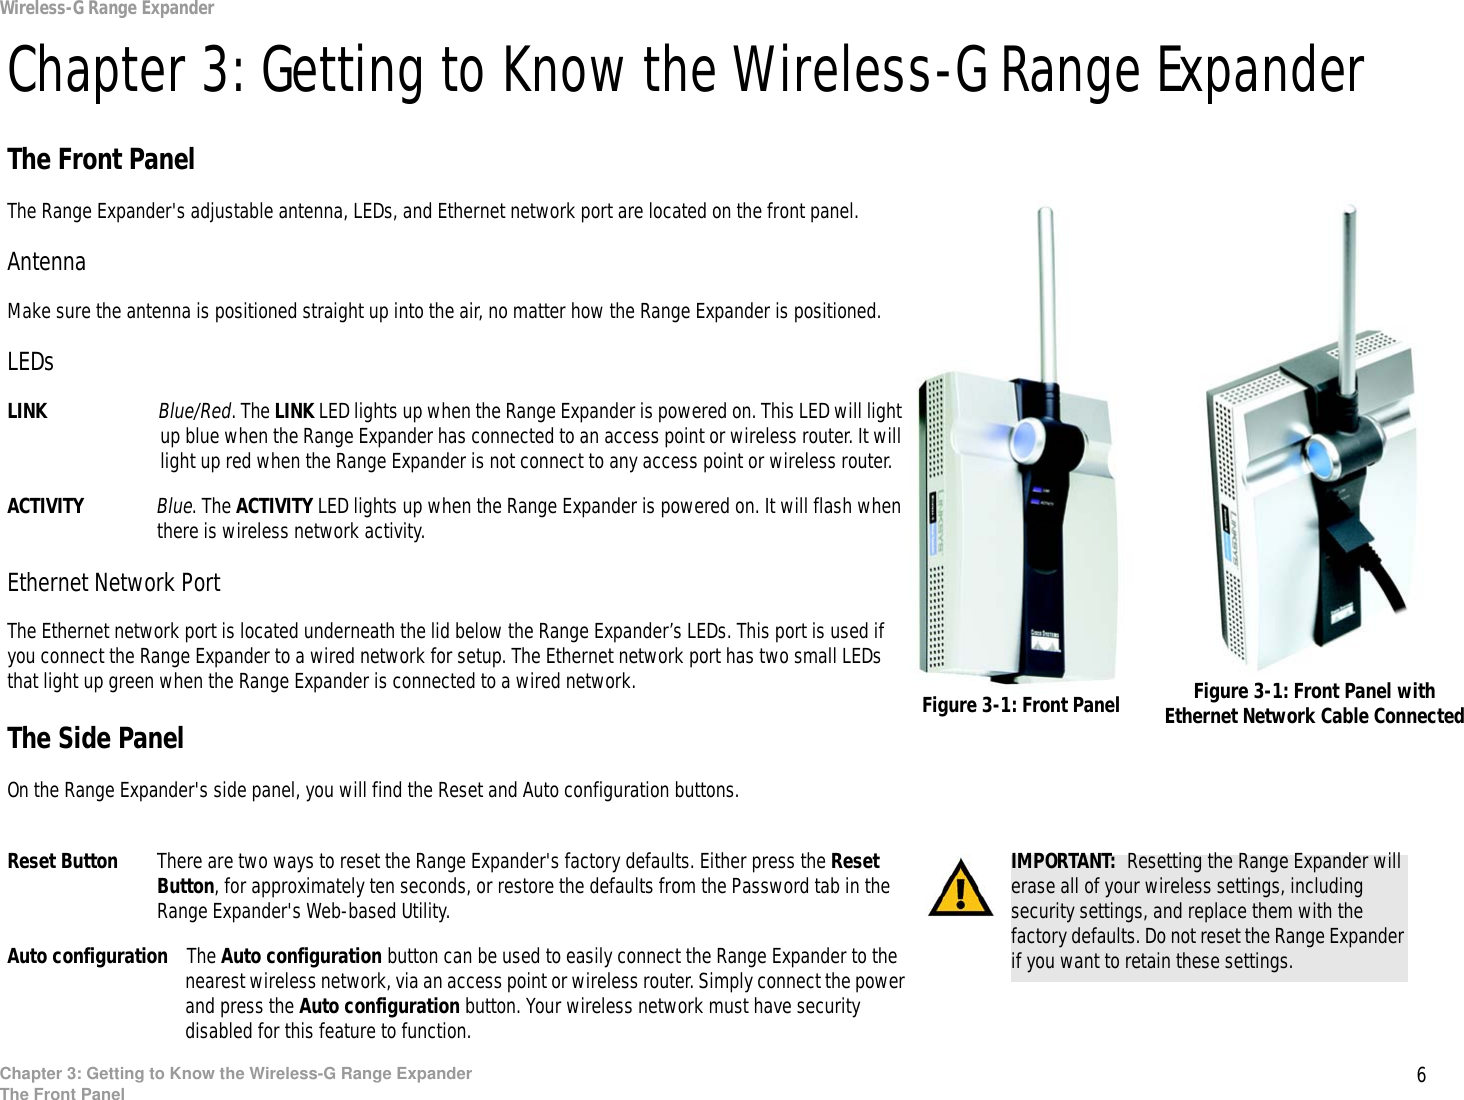 6Chapter 3: Getting to Know the Wireless-G Range ExpanderThe Front PanelWireless-G Range ExpanderChapter 3: Getting to Know the Wireless-G Range ExpanderThe Front PanelThe Range Expander&apos;s adjustable antenna, LEDs, and Ethernet network port are located on the front panel.AntennaMake sure the antenna is positioned straight up into the air, no matter how the Range Expander is positioned.LEDsLINK Blue/Red. The LINK LED lights up when the Range Expander is powered on. This LED will light up blue when the Range Expander has connected to an access point or wireless router. It will light up red when the Range Expander is not connect to any access point or wireless router.ACTIVITY Blue. The ACTIVITY LED lights up when the Range Expander is powered on. It will flash when there is wireless network activity.Ethernet Network PortThe Ethernet network port is located underneath the lid below the Range Expander’s LEDs. This port is used if you connect the Range Expander to a wired network for setup. The Ethernet network port has two small LEDs that light up green when the Range Expander is connected to a wired network.The Side PanelOn the Range Expander&apos;s side panel, you will find the Reset and Auto configuration buttons.Reset Button There are two ways to reset the Range Expander&apos;s factory defaults. Either press the Reset Button, for approximately ten seconds, or restore the defaults from the Password tab in the Range Expander&apos;s Web-based Utility.Auto configuration The Auto configuration button can be used to easily connect the Range Expander to the nearest wireless network, via an access point or wireless router. Simply connect the power and press the Auto configuration button. Your wireless network must have security disabled for this feature to function.IMPORTANT:  Resetting the Range Expander will erase all of your wireless settings, including security settings, and replace them with the factory defaults. Do not reset the Range Expander if you want to retain these settings.Figure 3-1: Front Panel Figure 3-1: Front Panel with Ethernet Network Cable Connected